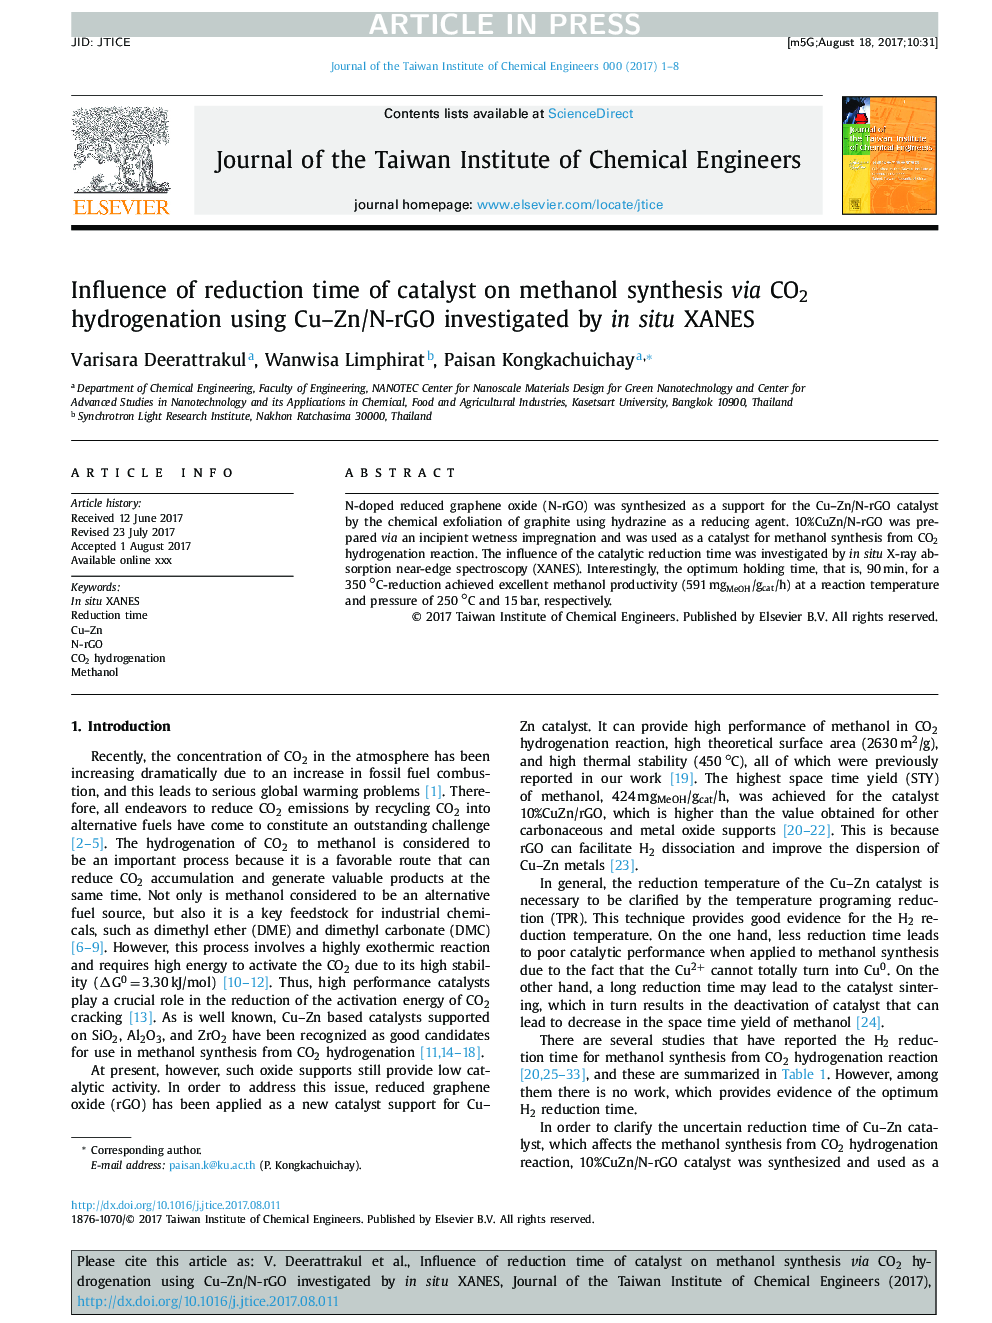 Influence of reduction time of catalyst on methanol synthesis via CO2 hydrogenation using Cu-Zn/N-rGO investigated by in situ XANES